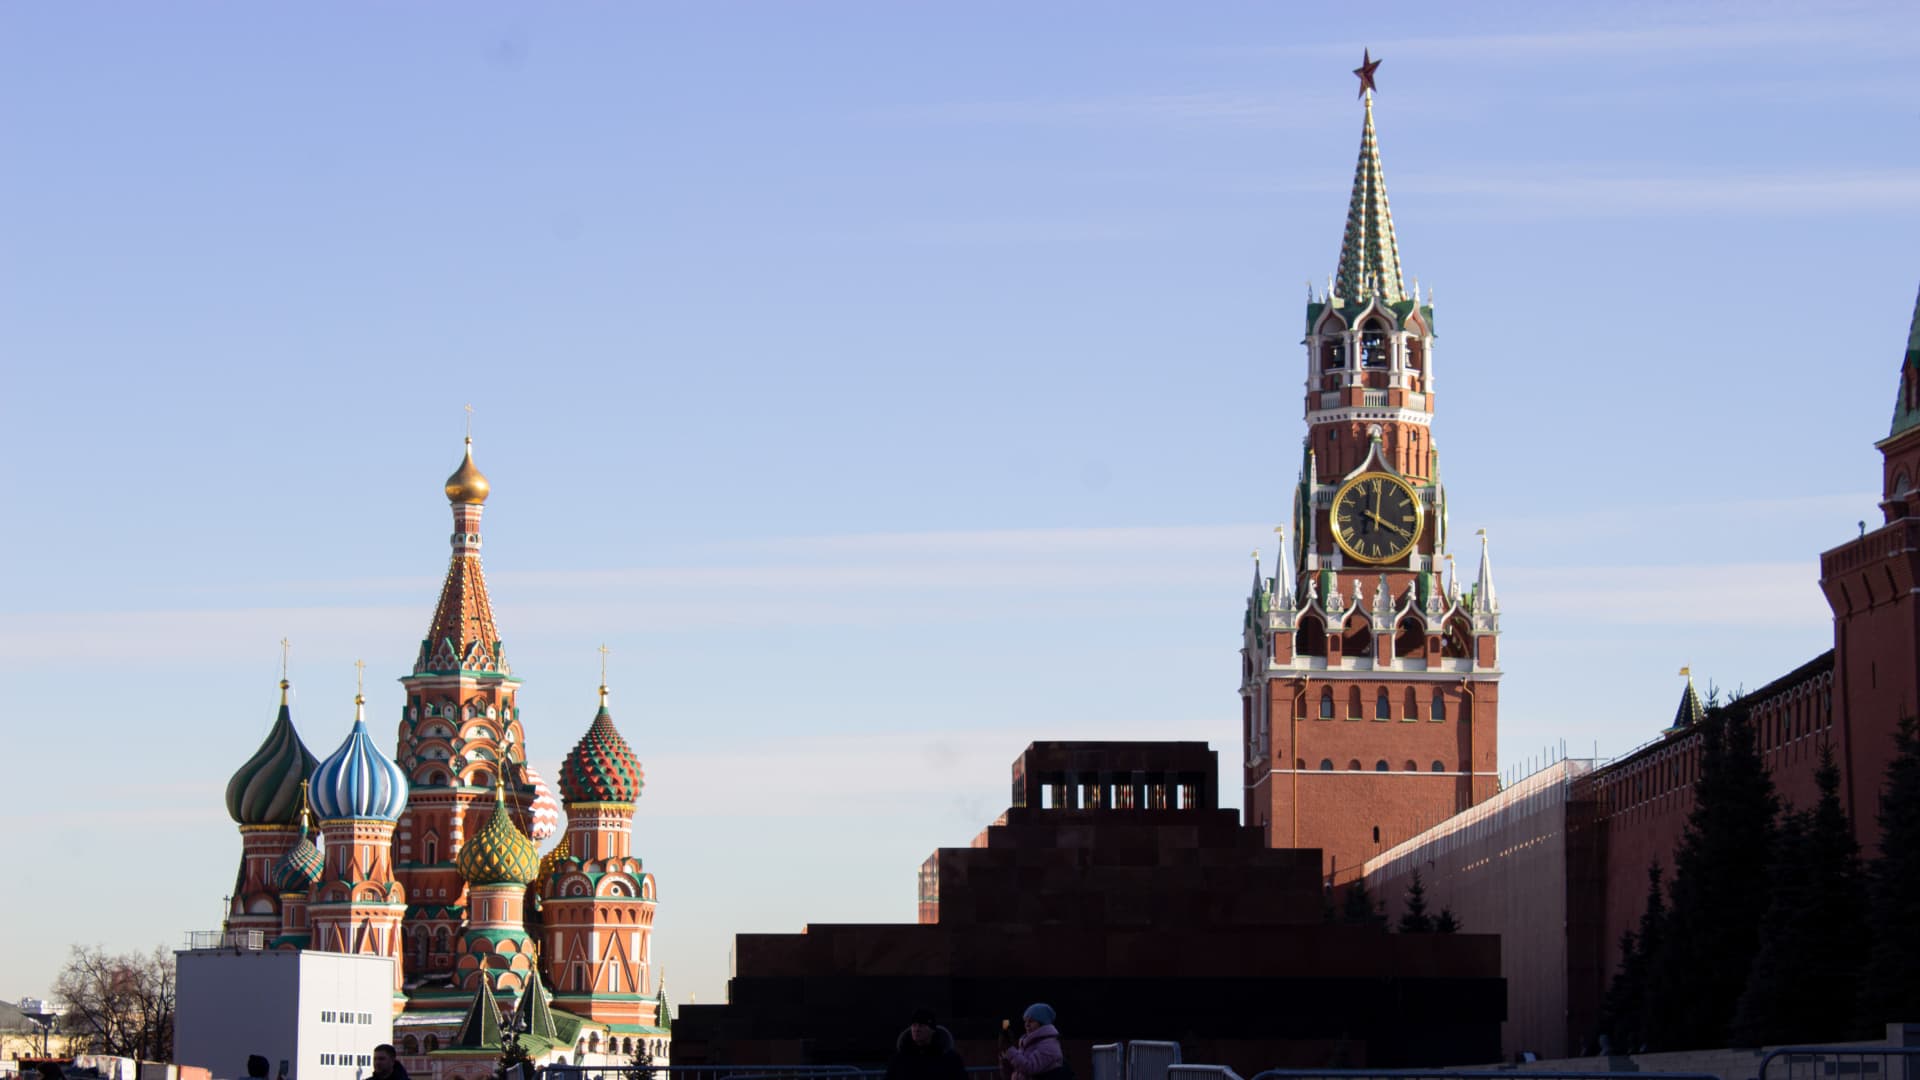 The St. Basil Cathedral and a Kremlin tower are visible on the Red Square in Moscow.